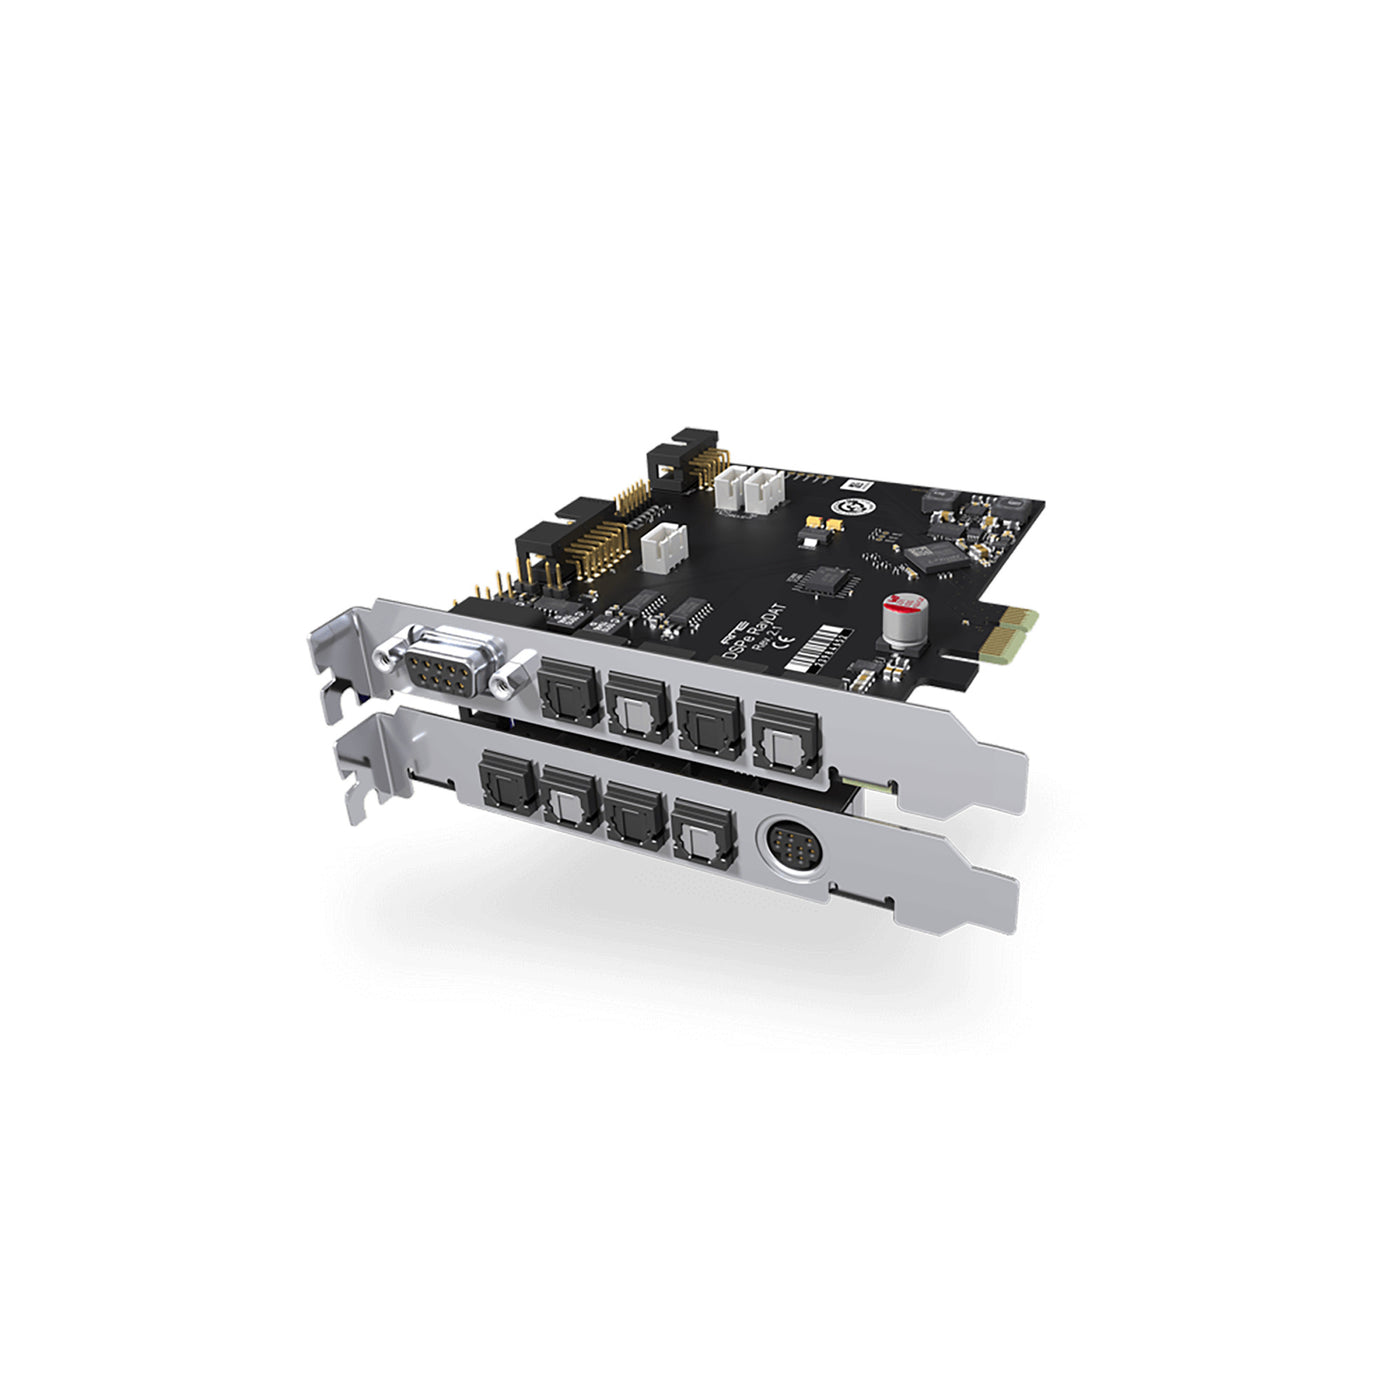 RME HDSPeRayDAT Multi-channel Audio Interface Card with ADAT, S/PDIF, S/MUX, AES/EBU, and MIDI I/O